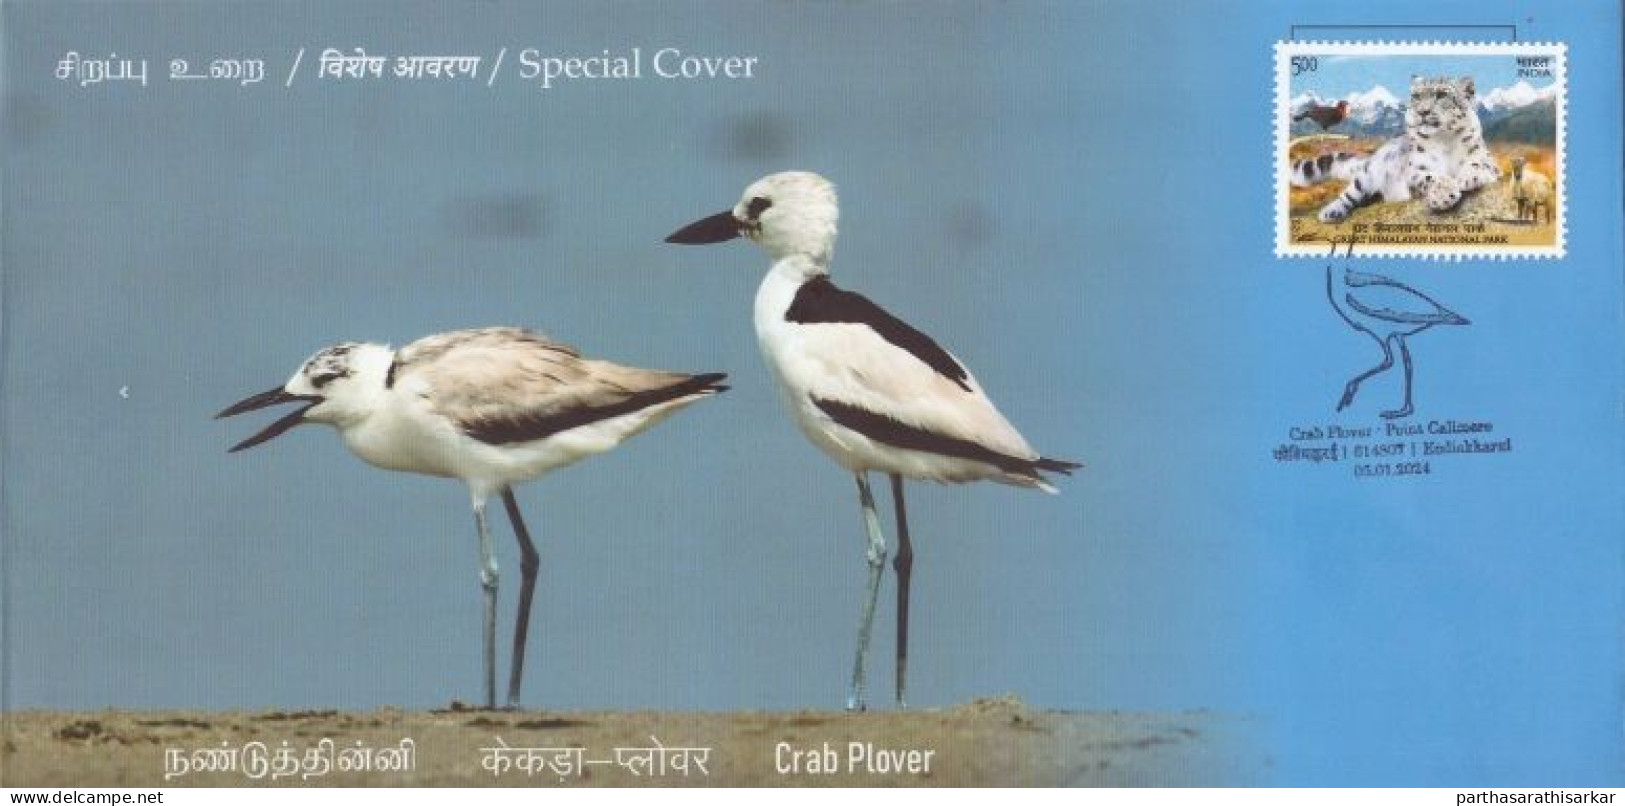 INDIA 2024 SET OF 6 SPECIAL COVER ISSUED FROM POINT CALIMERE WILDLIFE SANTURY KODIAKKARAI FAUNA BIRDS LIMITED KNOWN RARE